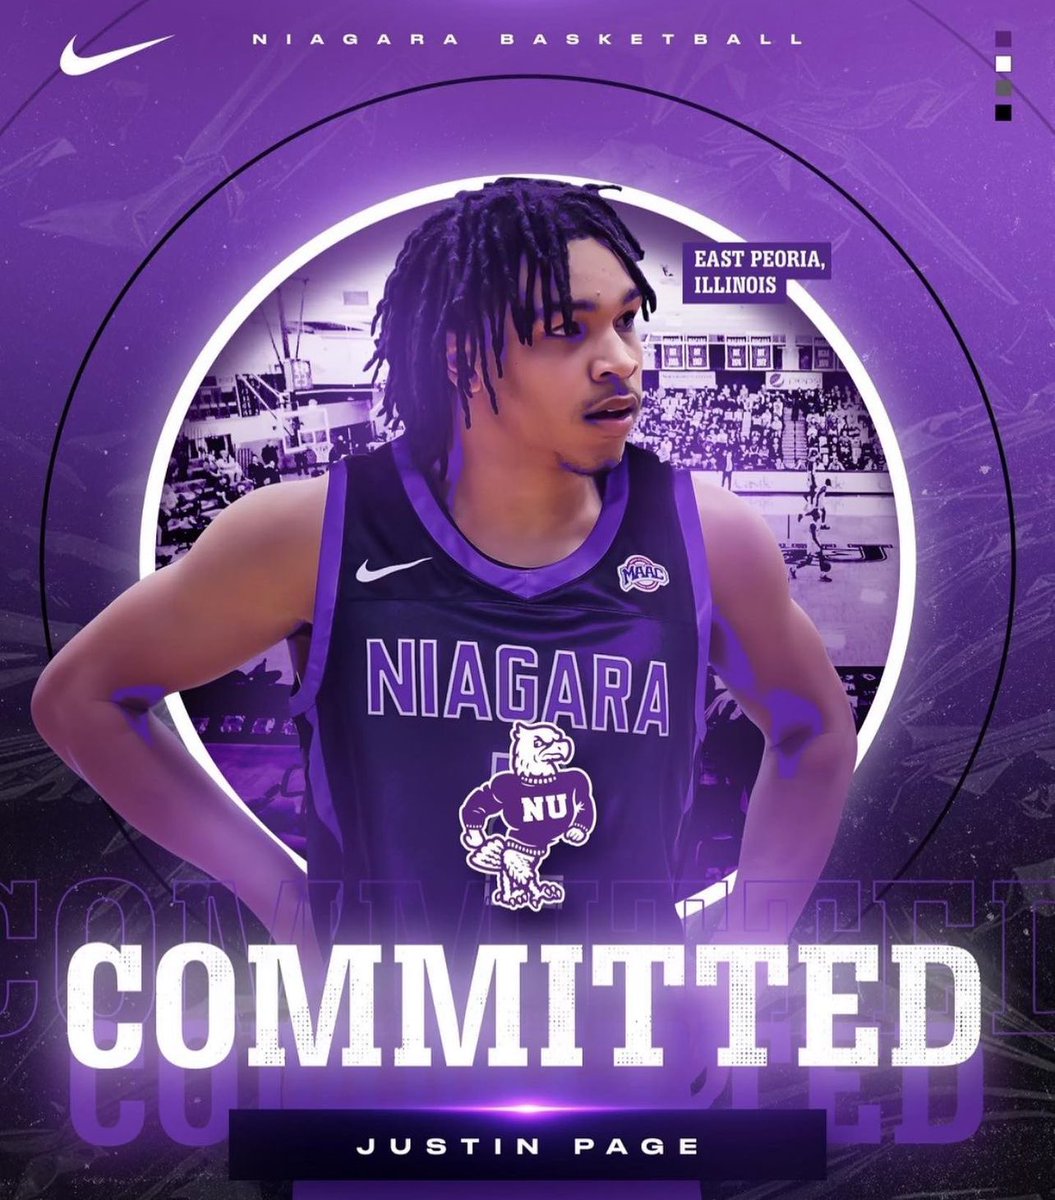 Cal Poly freshman Justin Page has committed to Niagara Averaged: 5.1 PPG as a true freshman and shot 36% from deep